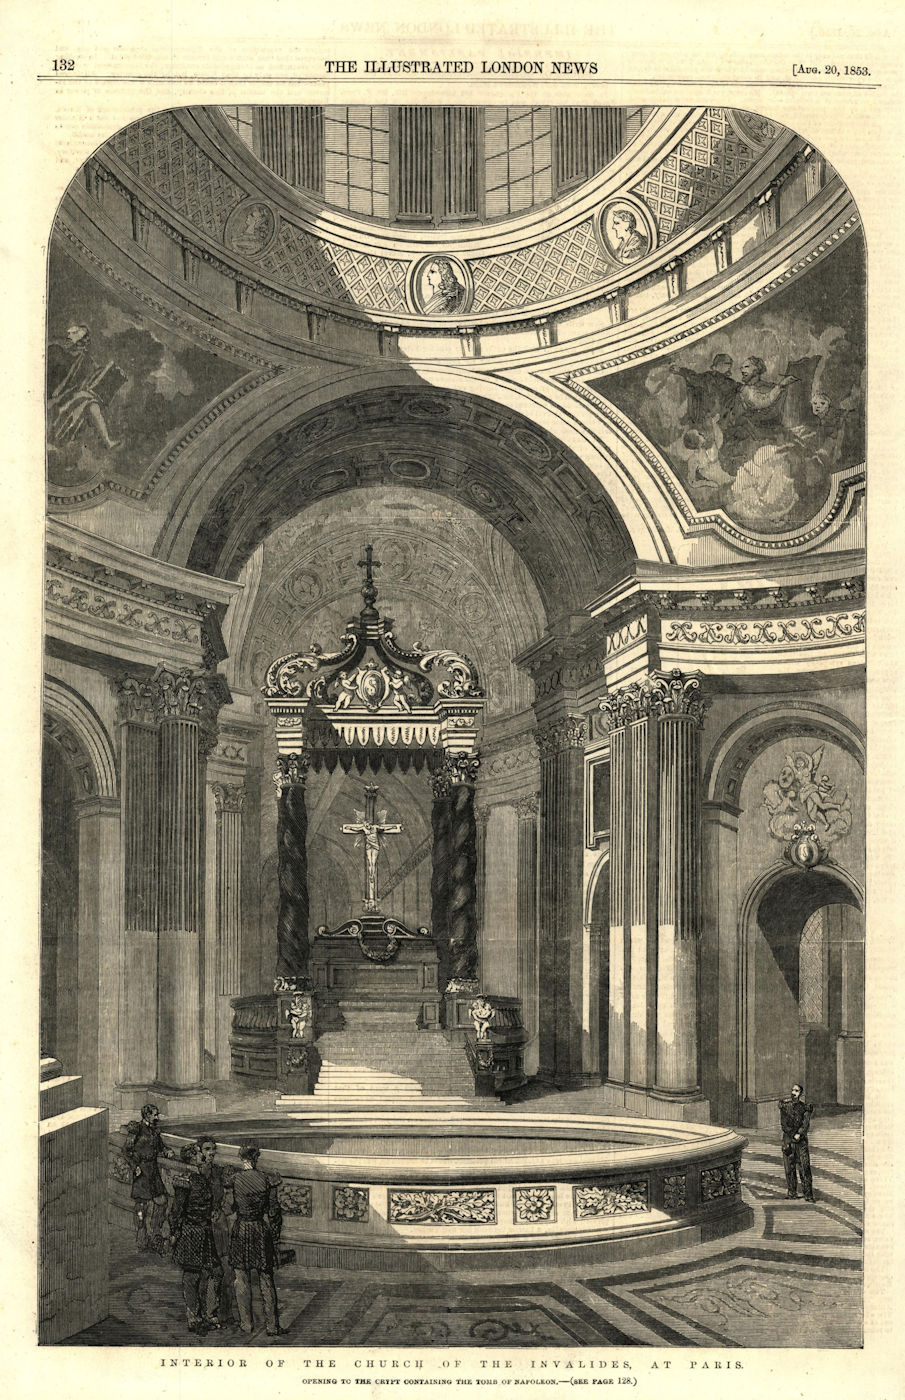 Associate Product Interior of the church of the Invalides, Paris - crypt of Napoleon's tomb 1853